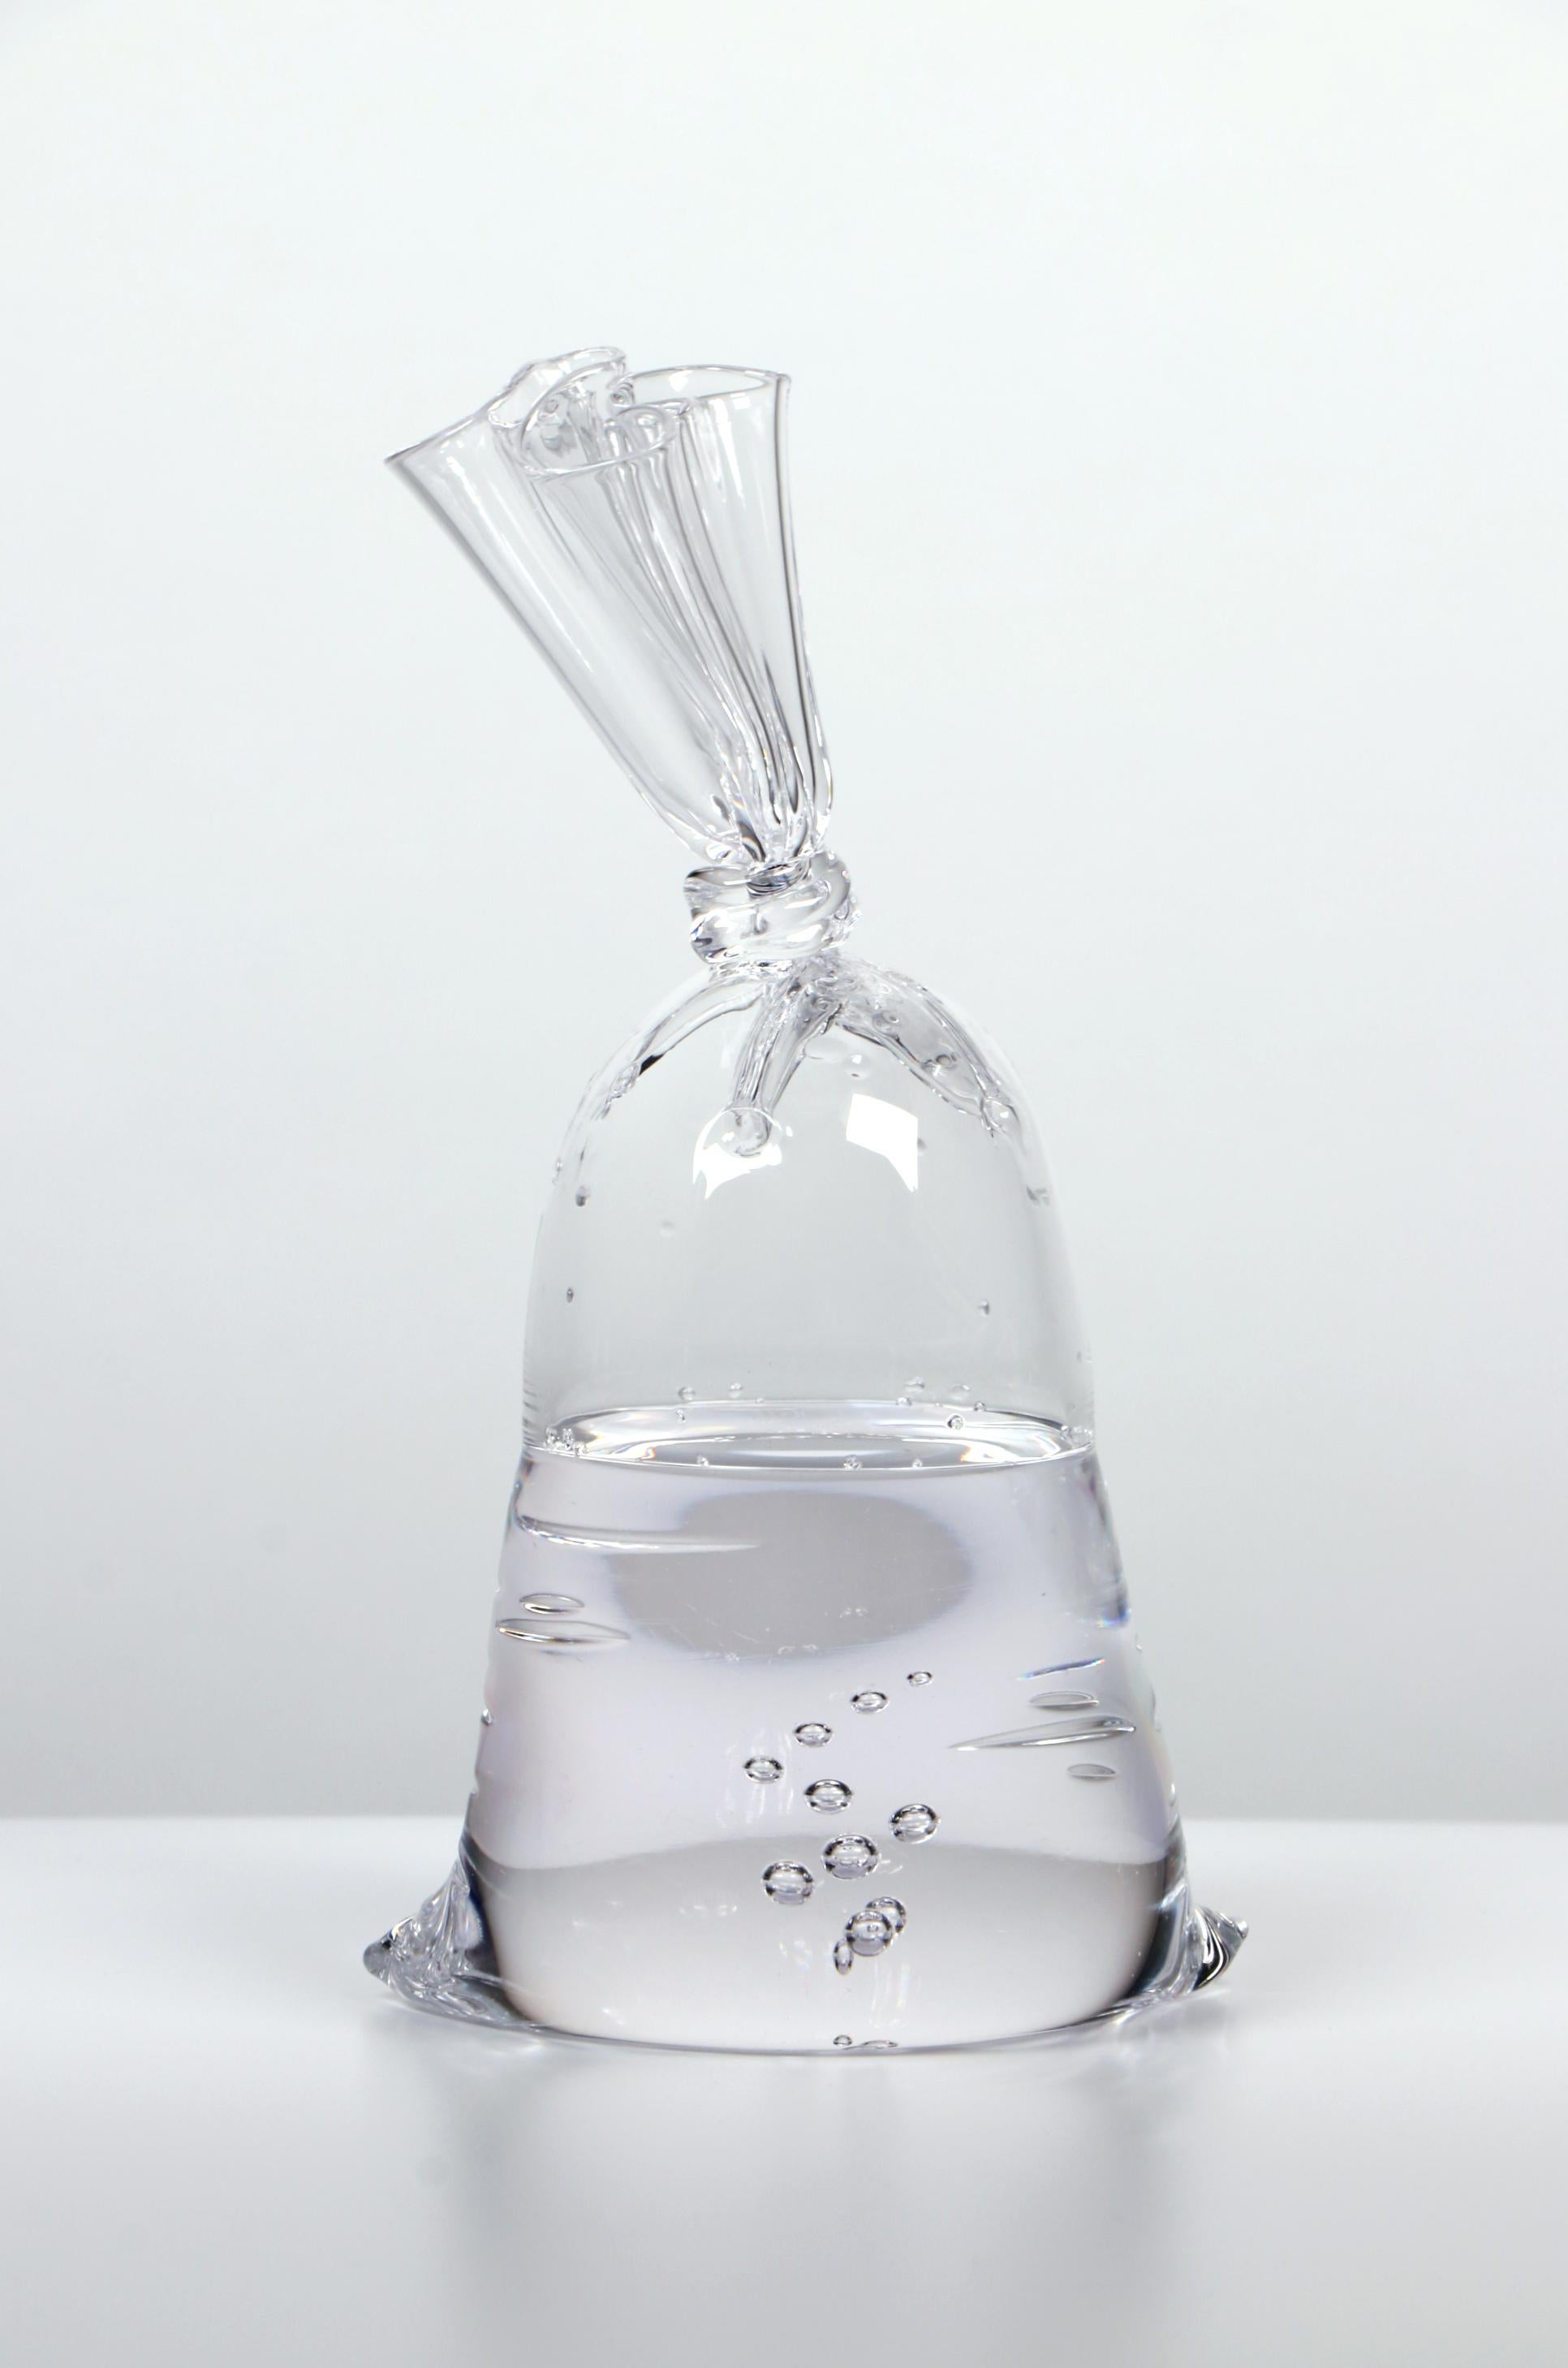 Mini Glass Water Bag - Hyperreal glass sculpture - Contemporary Sculpture by Dylan Martinez